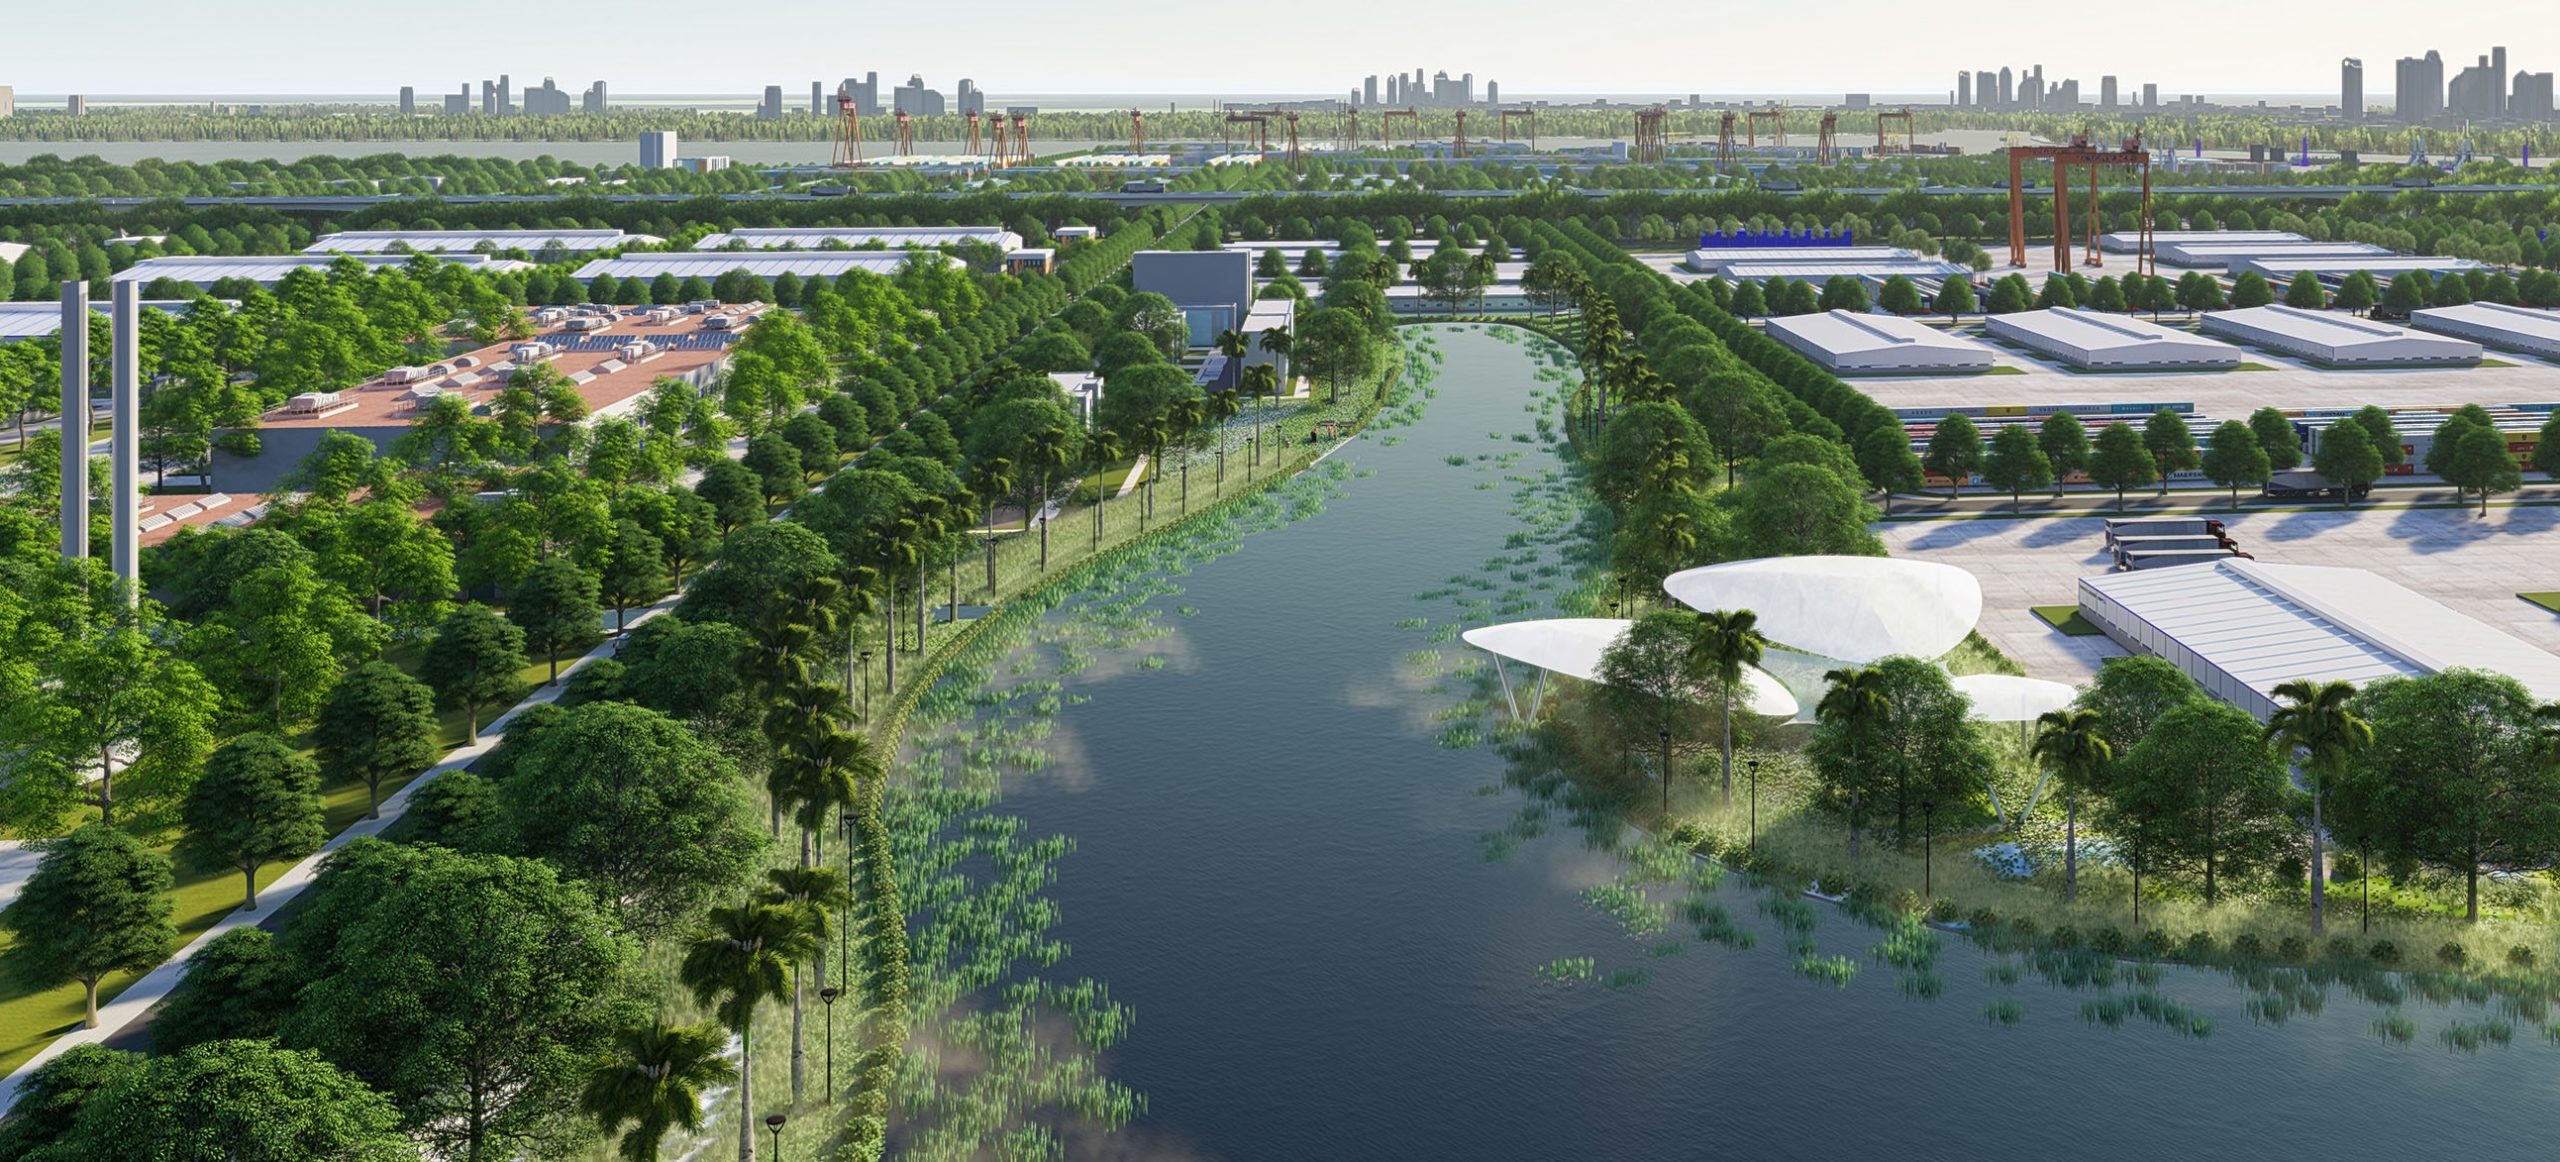 The factory area is surrounded by a multi-utility system in Nam Dinh Vu Industrial Park